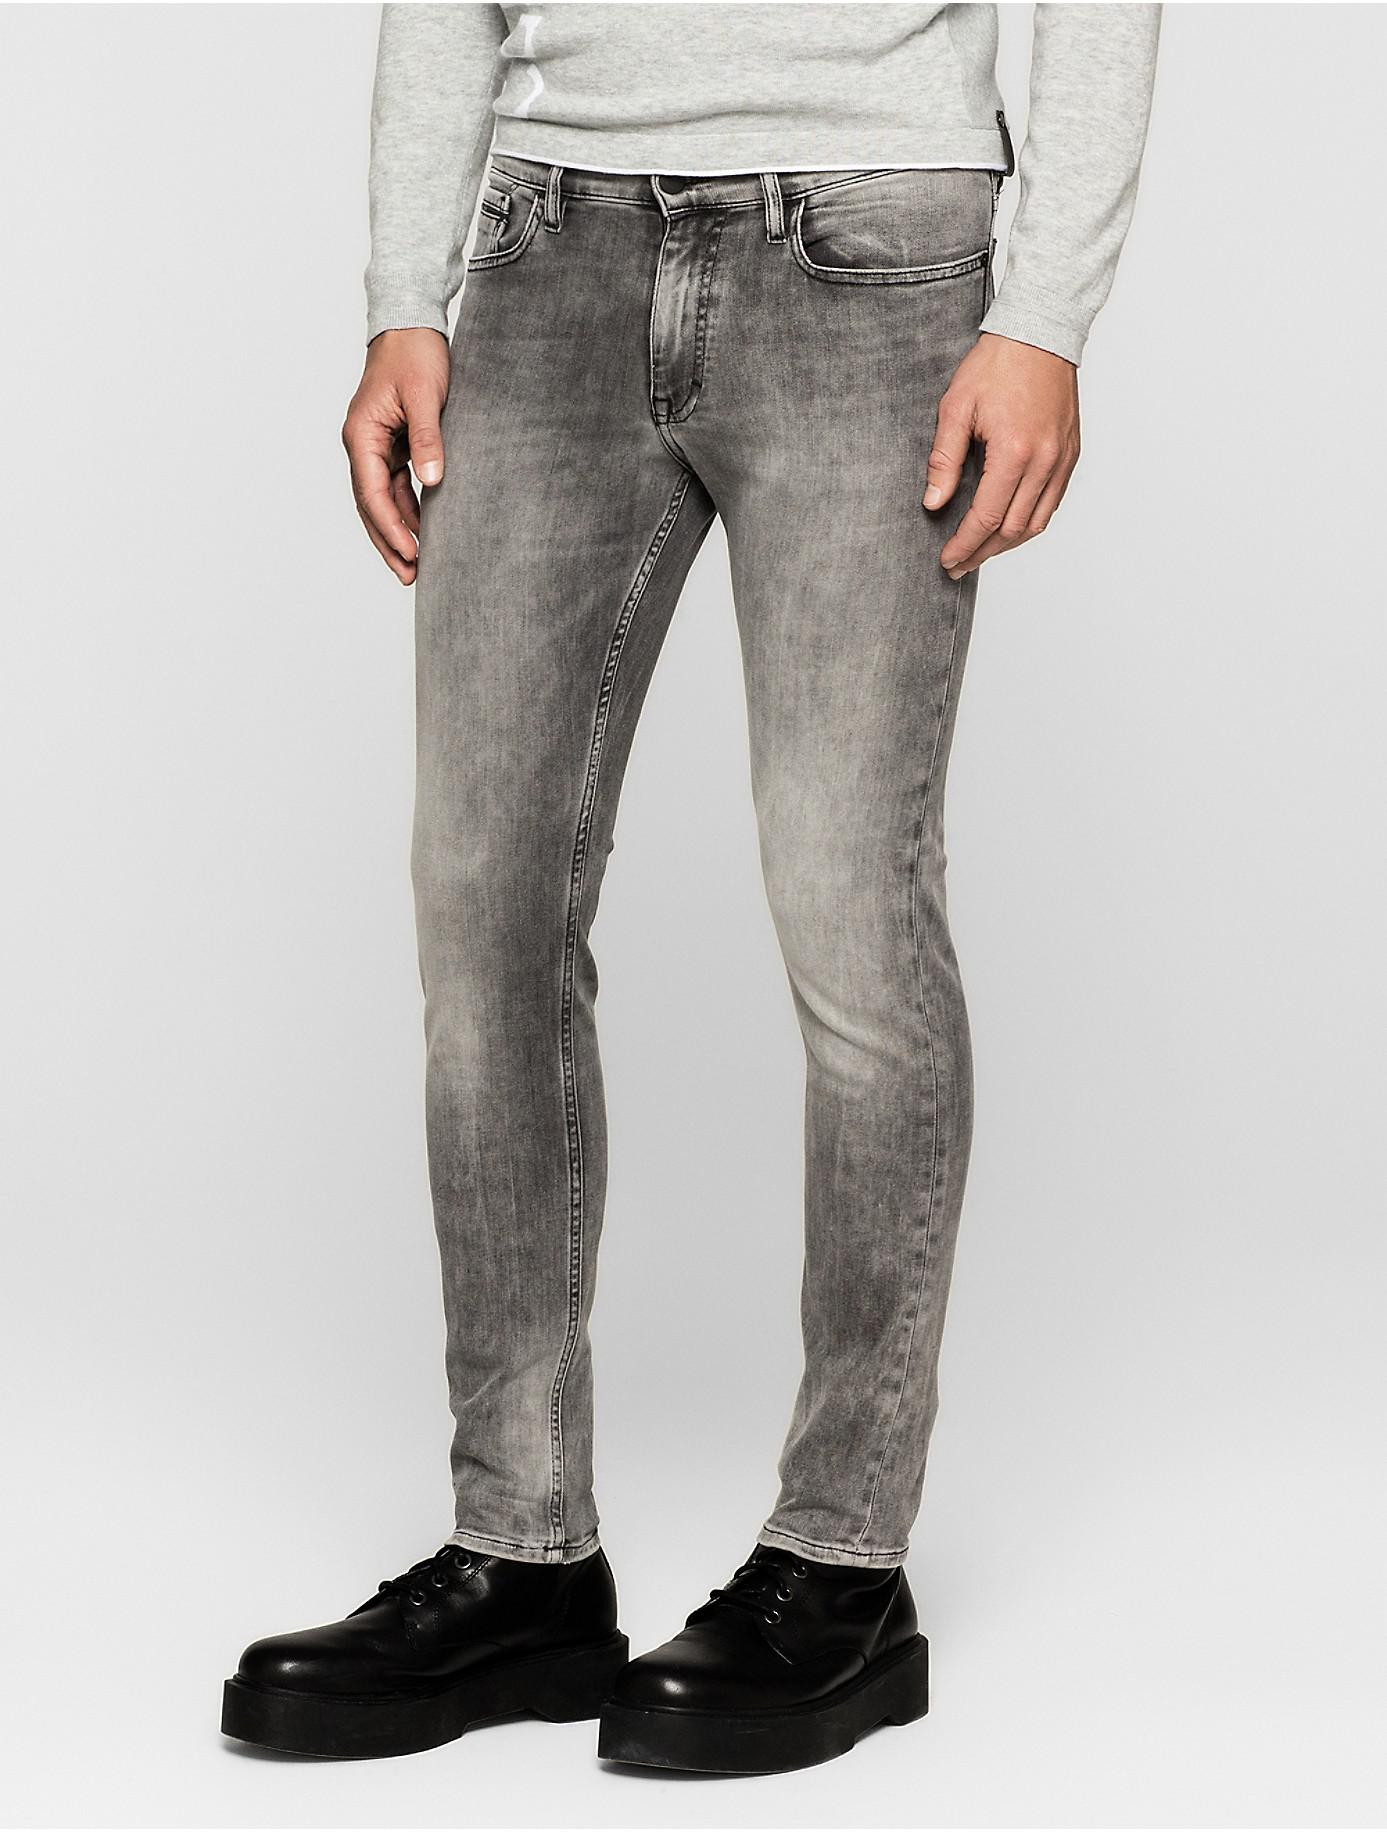 charcoal gray jeans